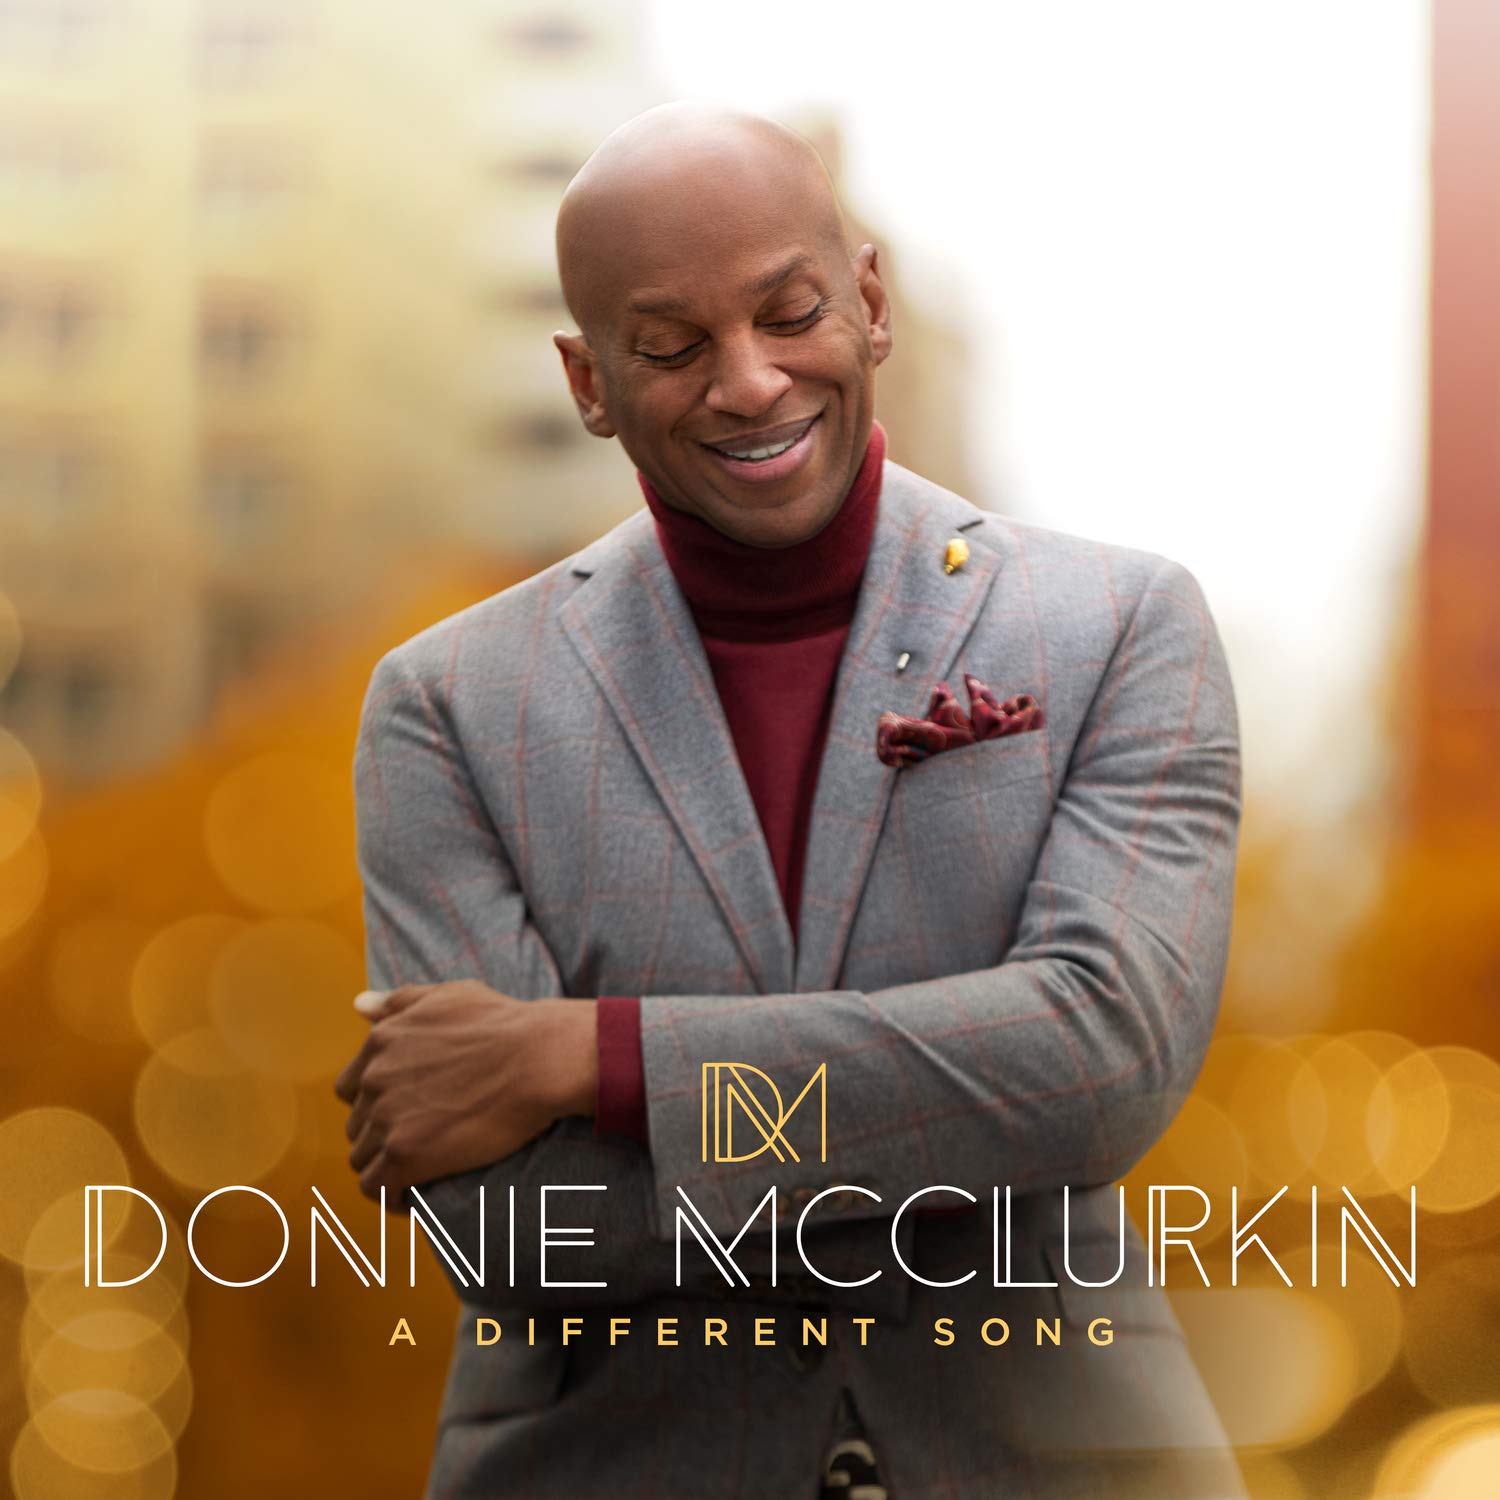 A Different Song_Donnie McClurkin